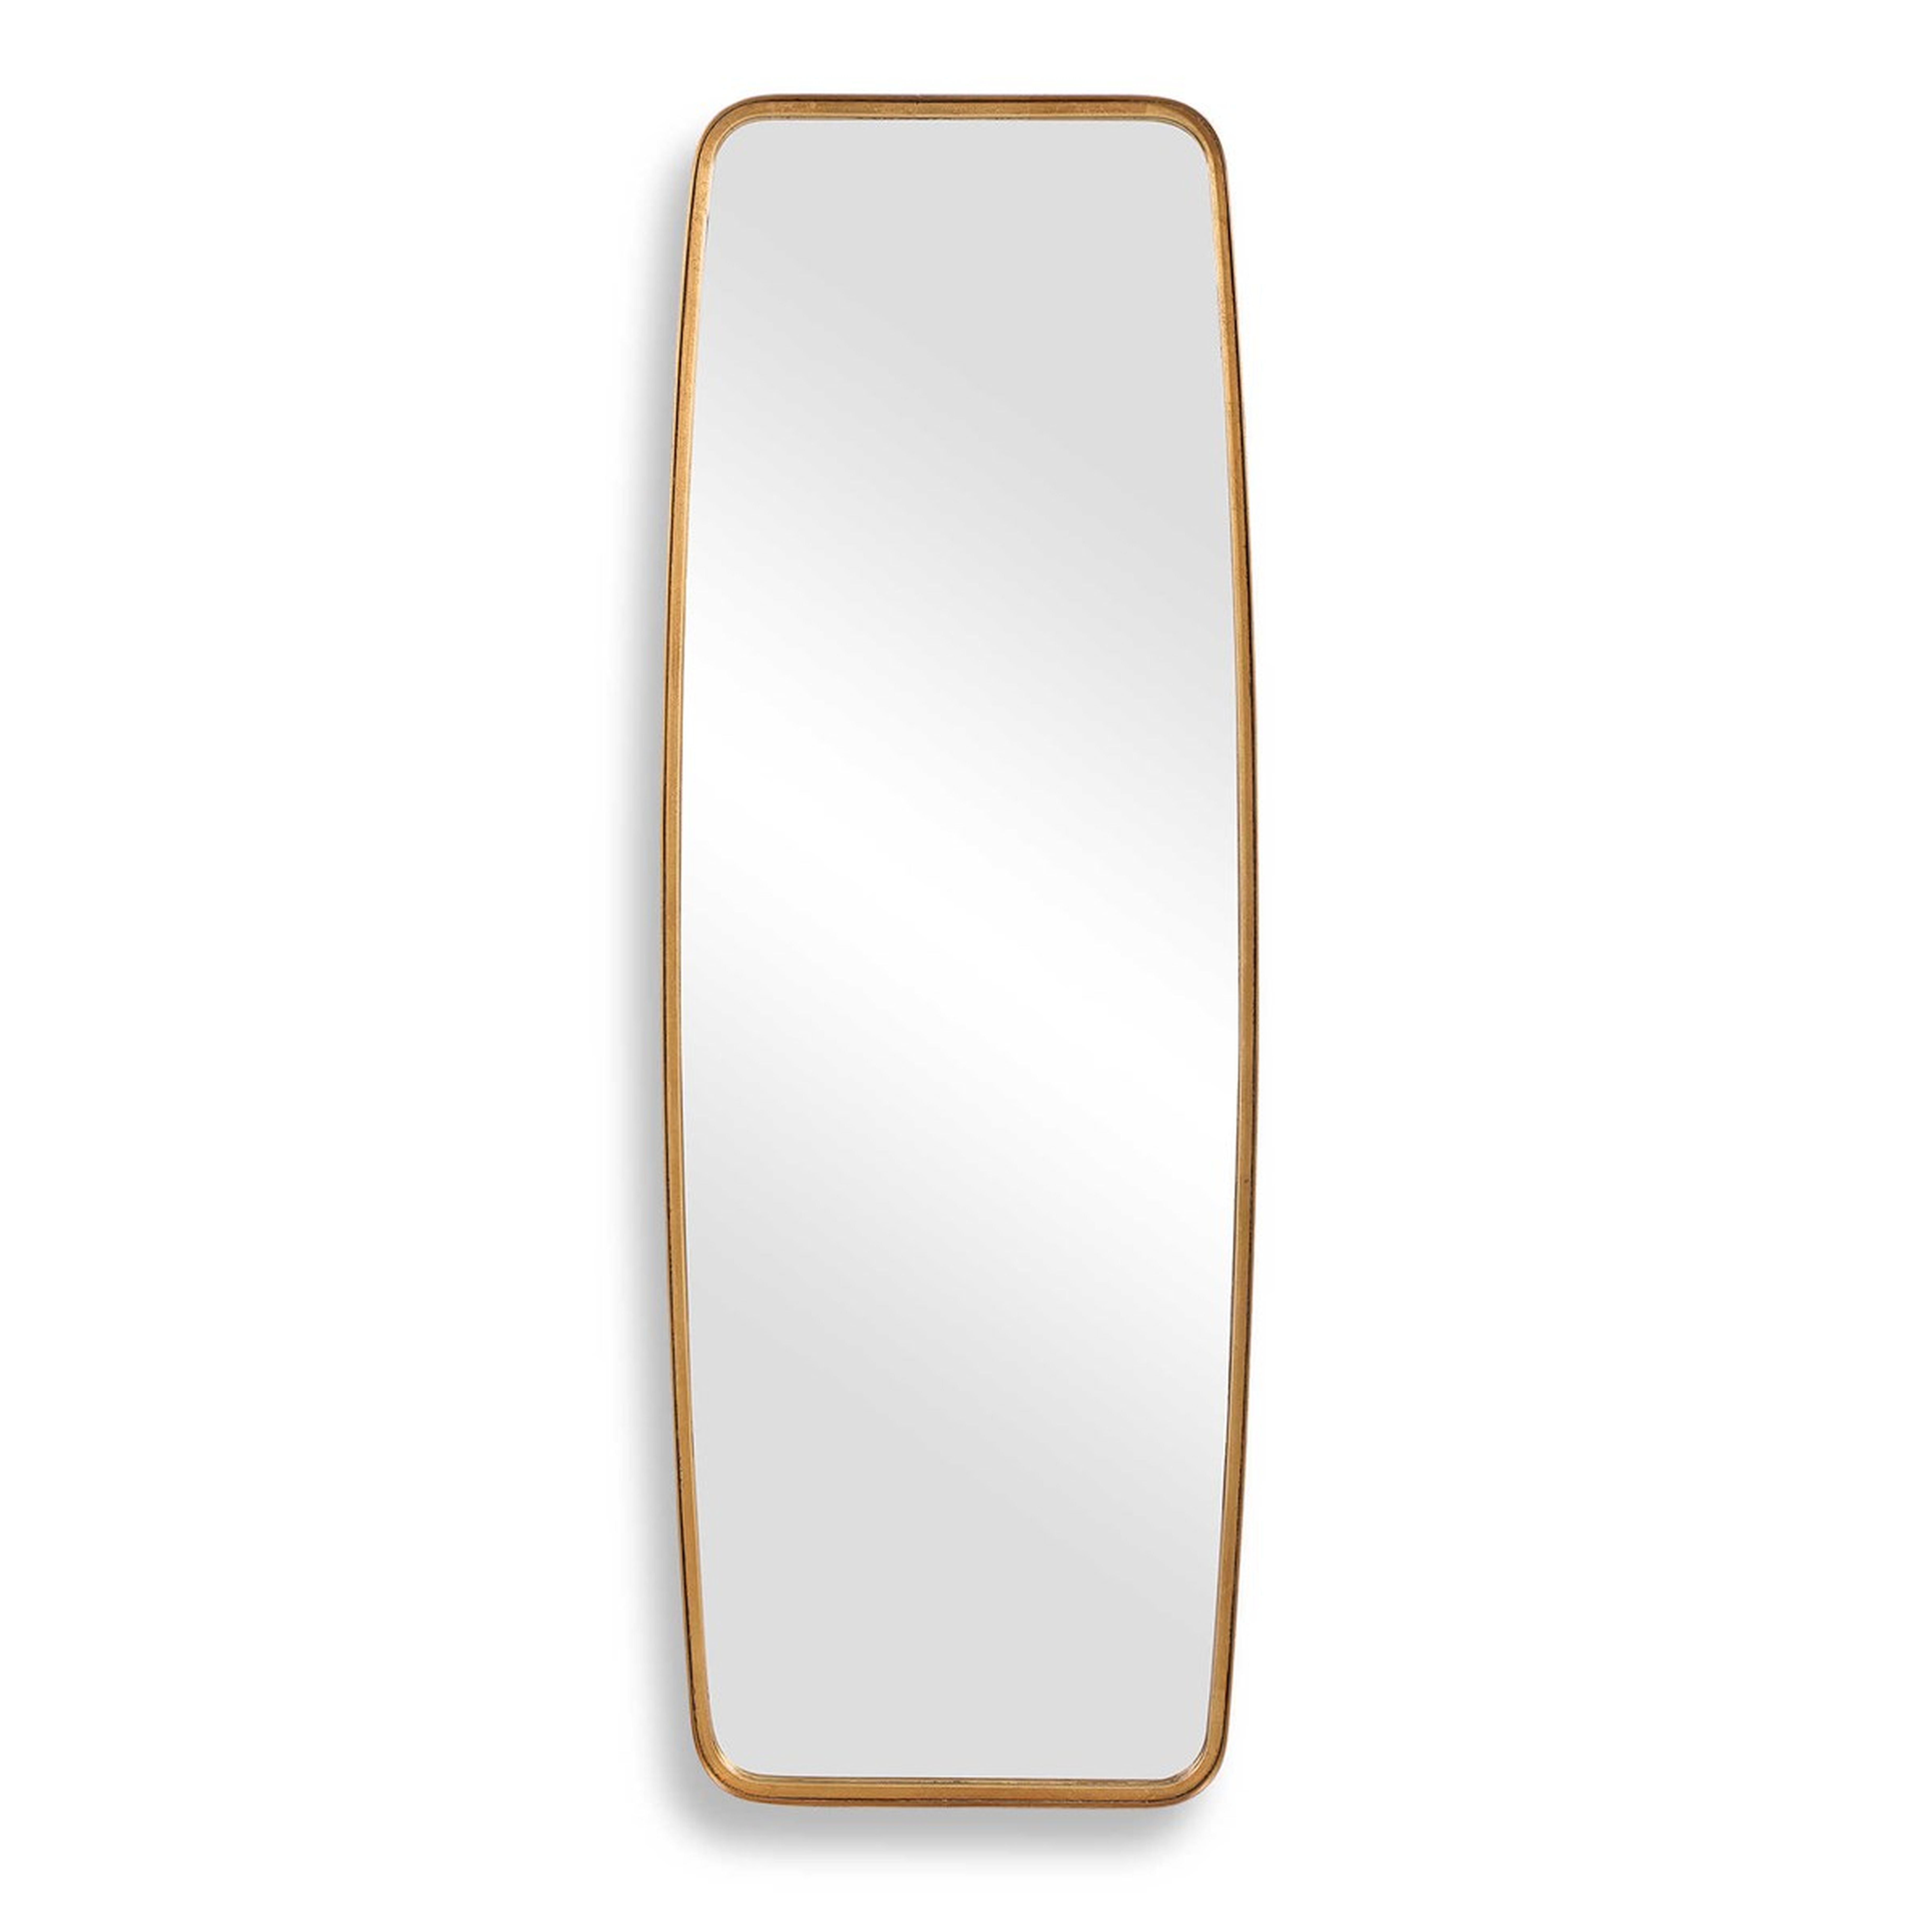 Rounded Corners Mirror - Hudsonhill Foundry